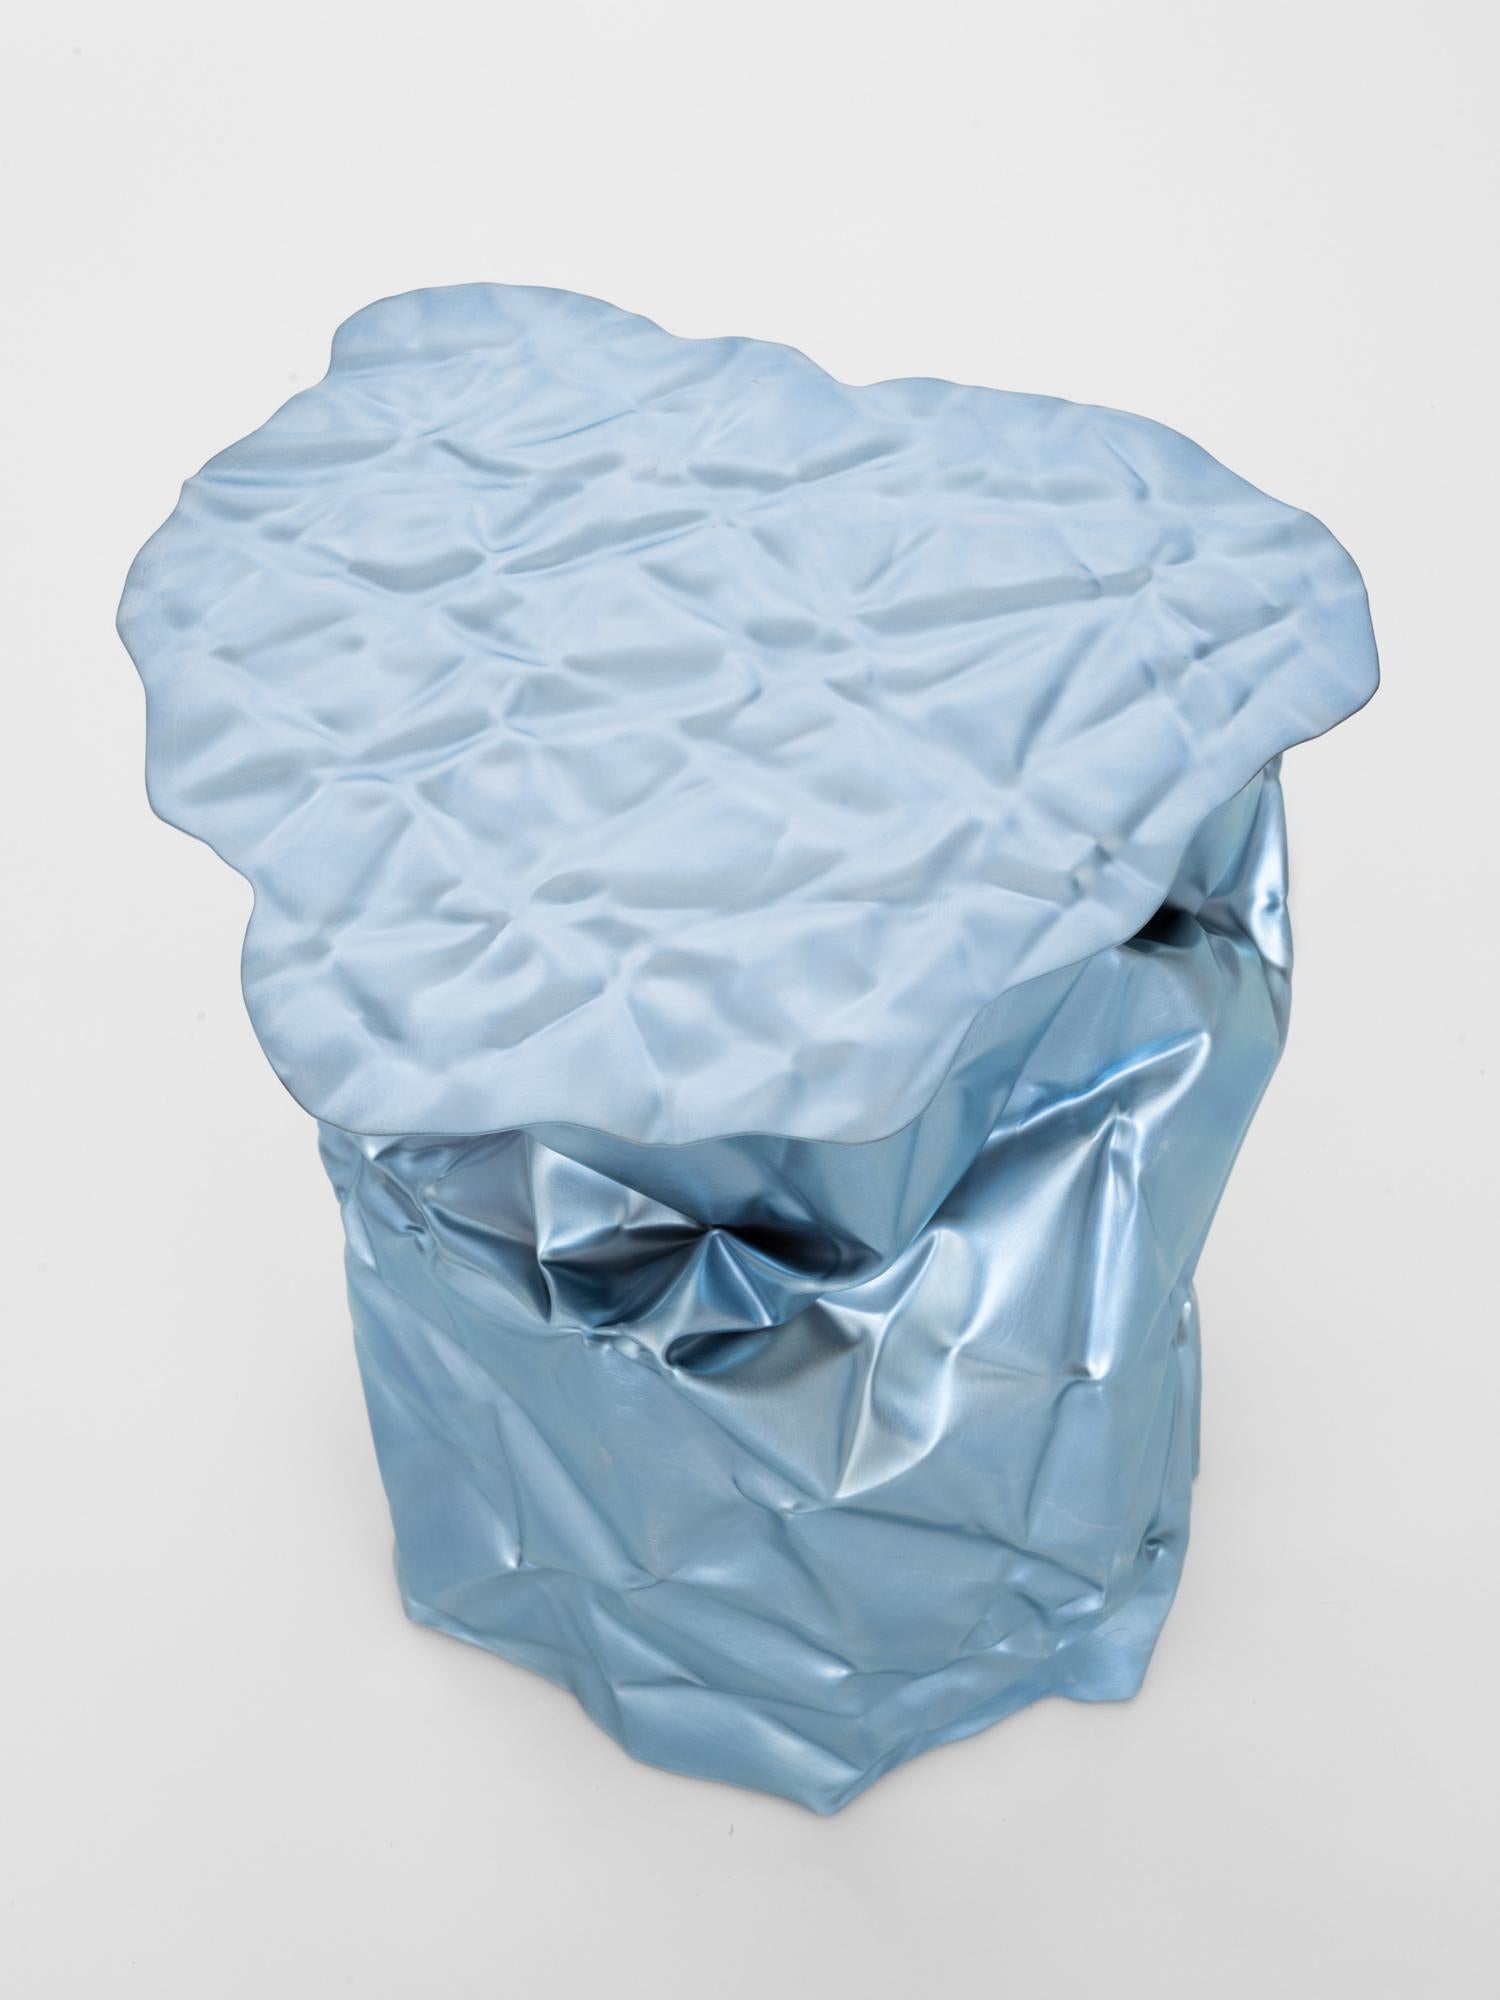 Christopher Prinz “Wrinkled Side Table” in Raw Zinc Nickel Blue In New Condition For Sale In Brooklyn, NY